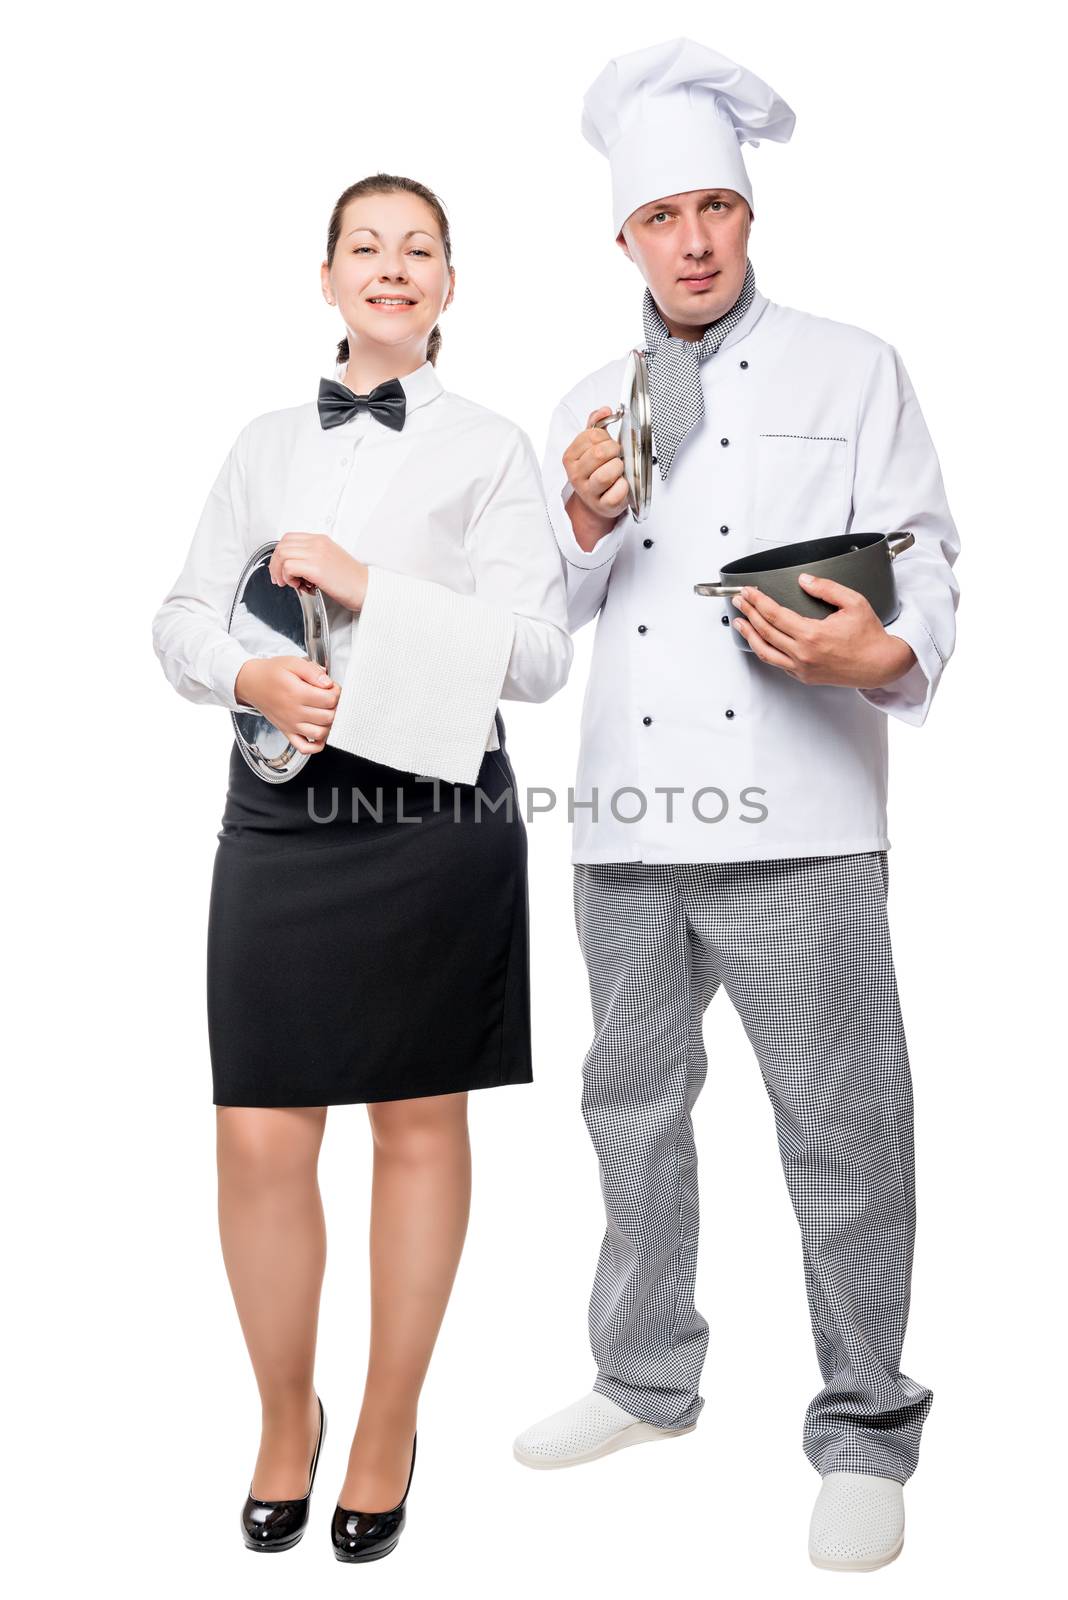 Chef with pan and waitress with a tray on a white background in full length